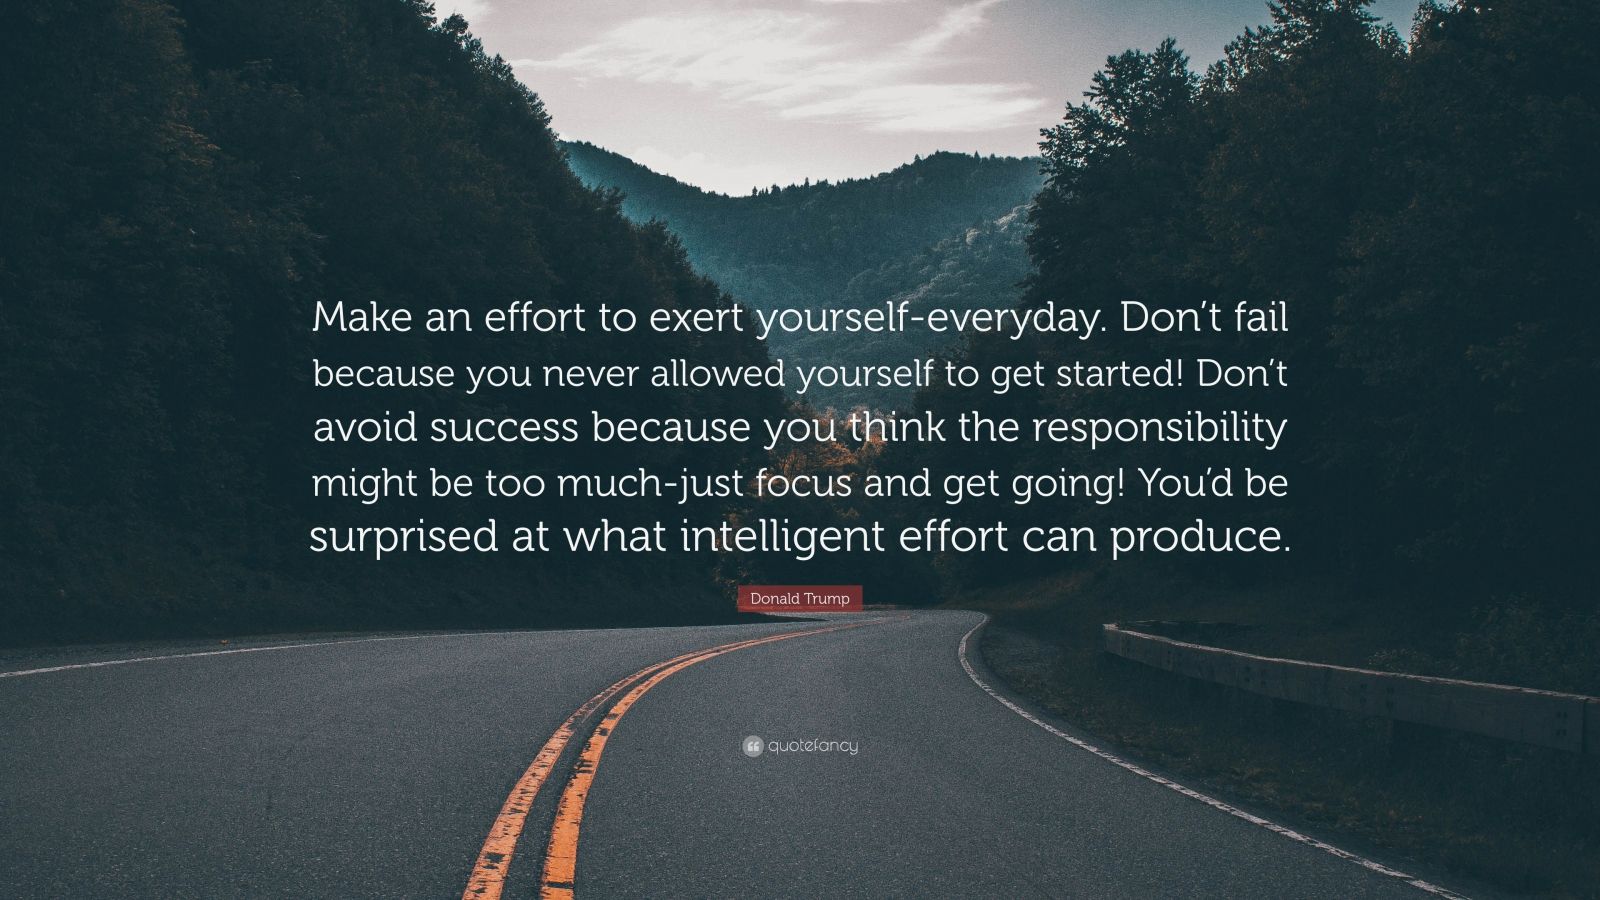 Donald Trump Quote: "Make an effort to exert yourself-everyd